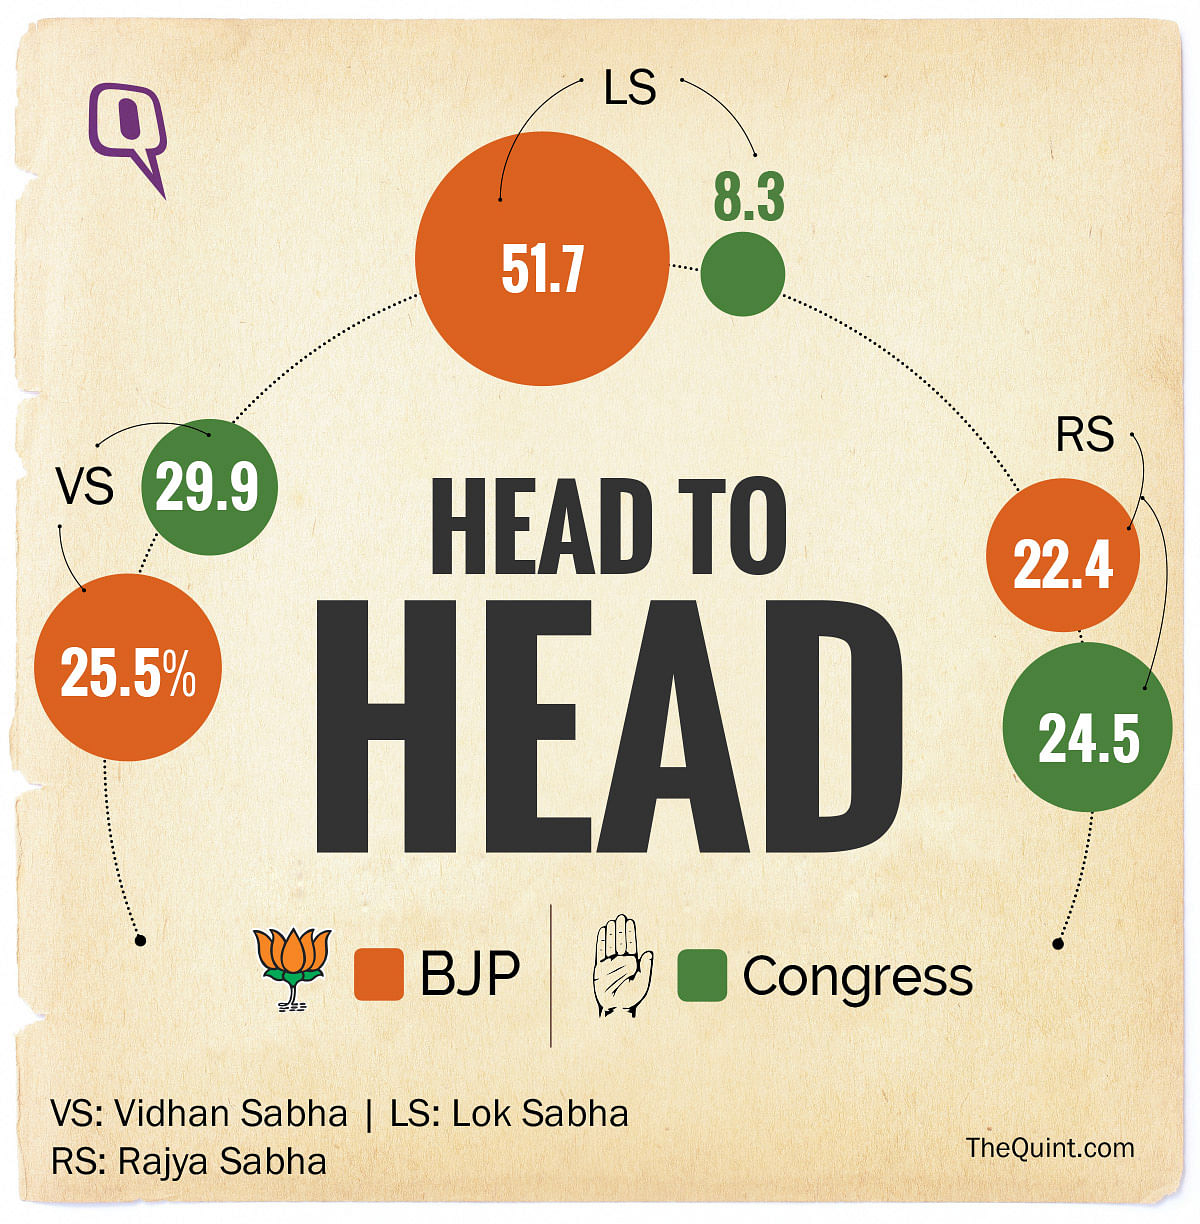 10 Reasons Why BJP’s Dream of Congress-Mukt Bharat Won’t Come True